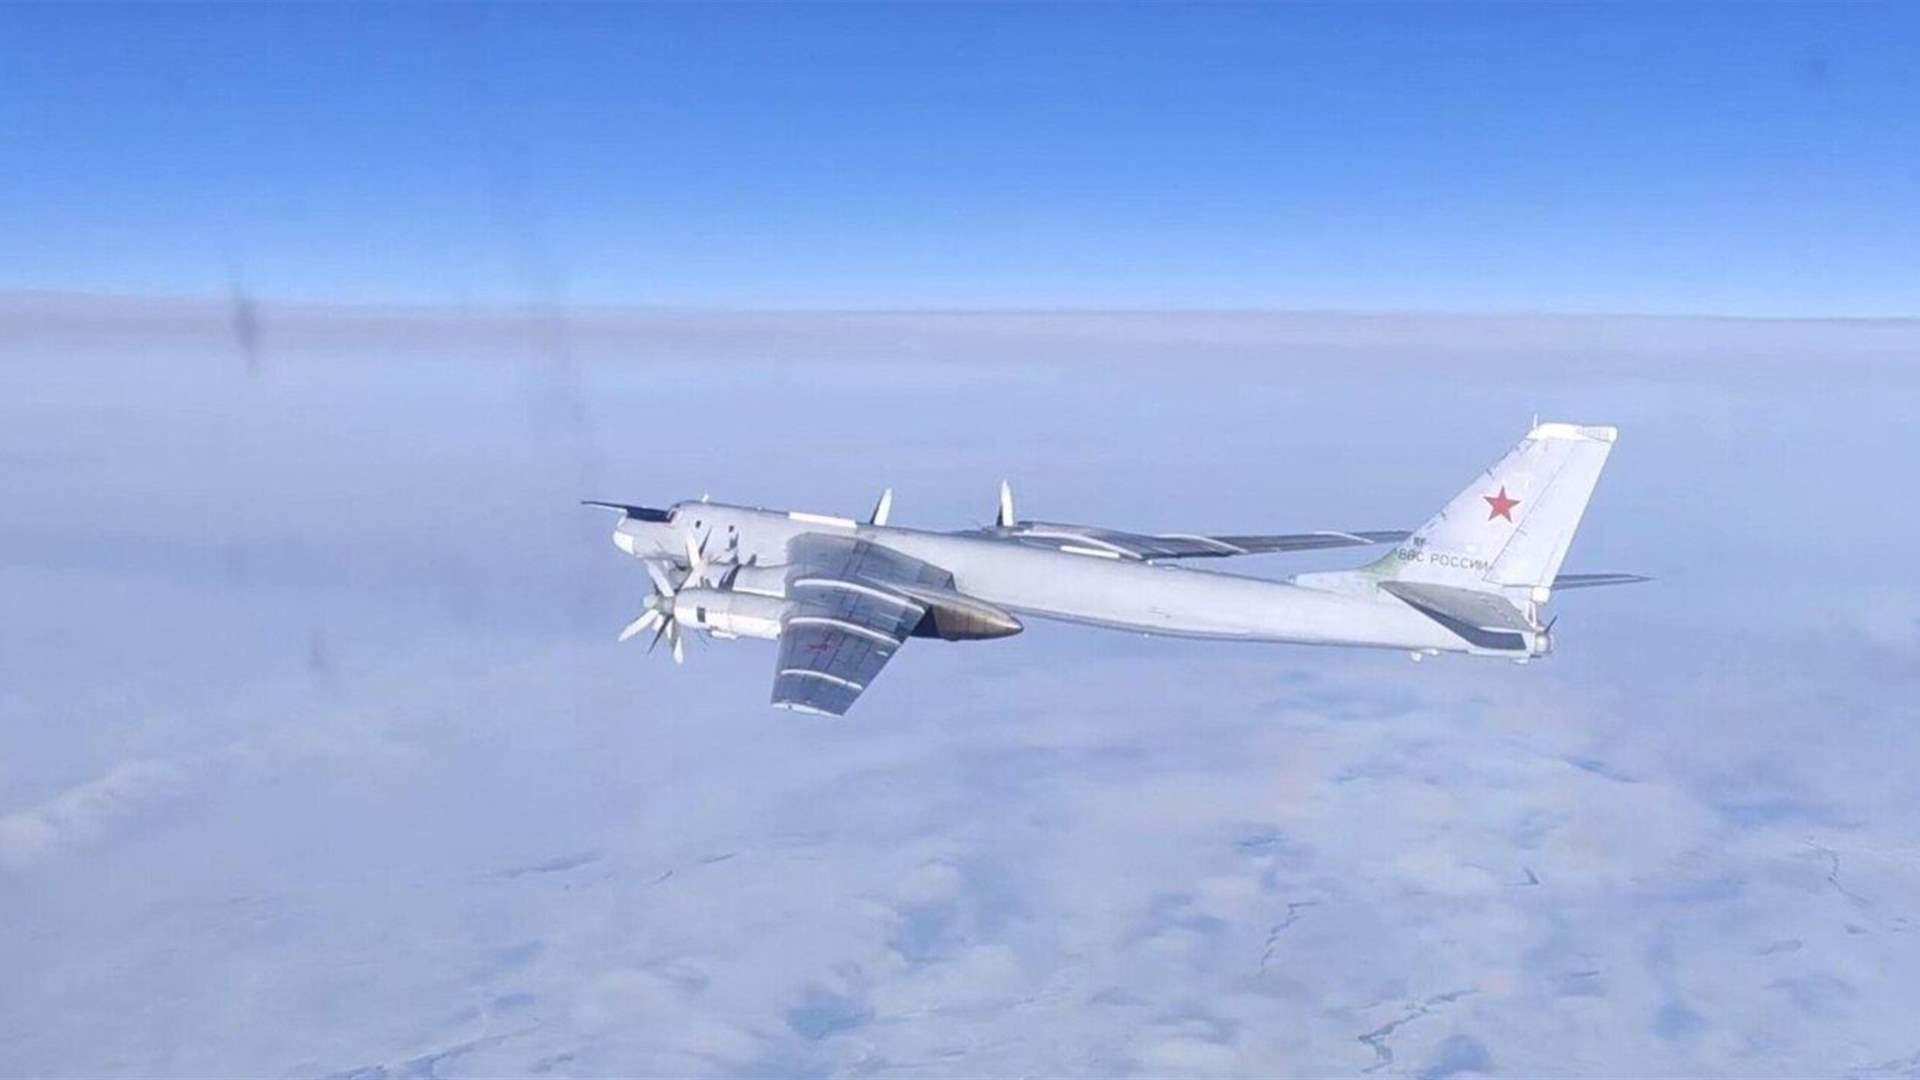 Russian, Chinese bombers carried out joint patrol near Alaska